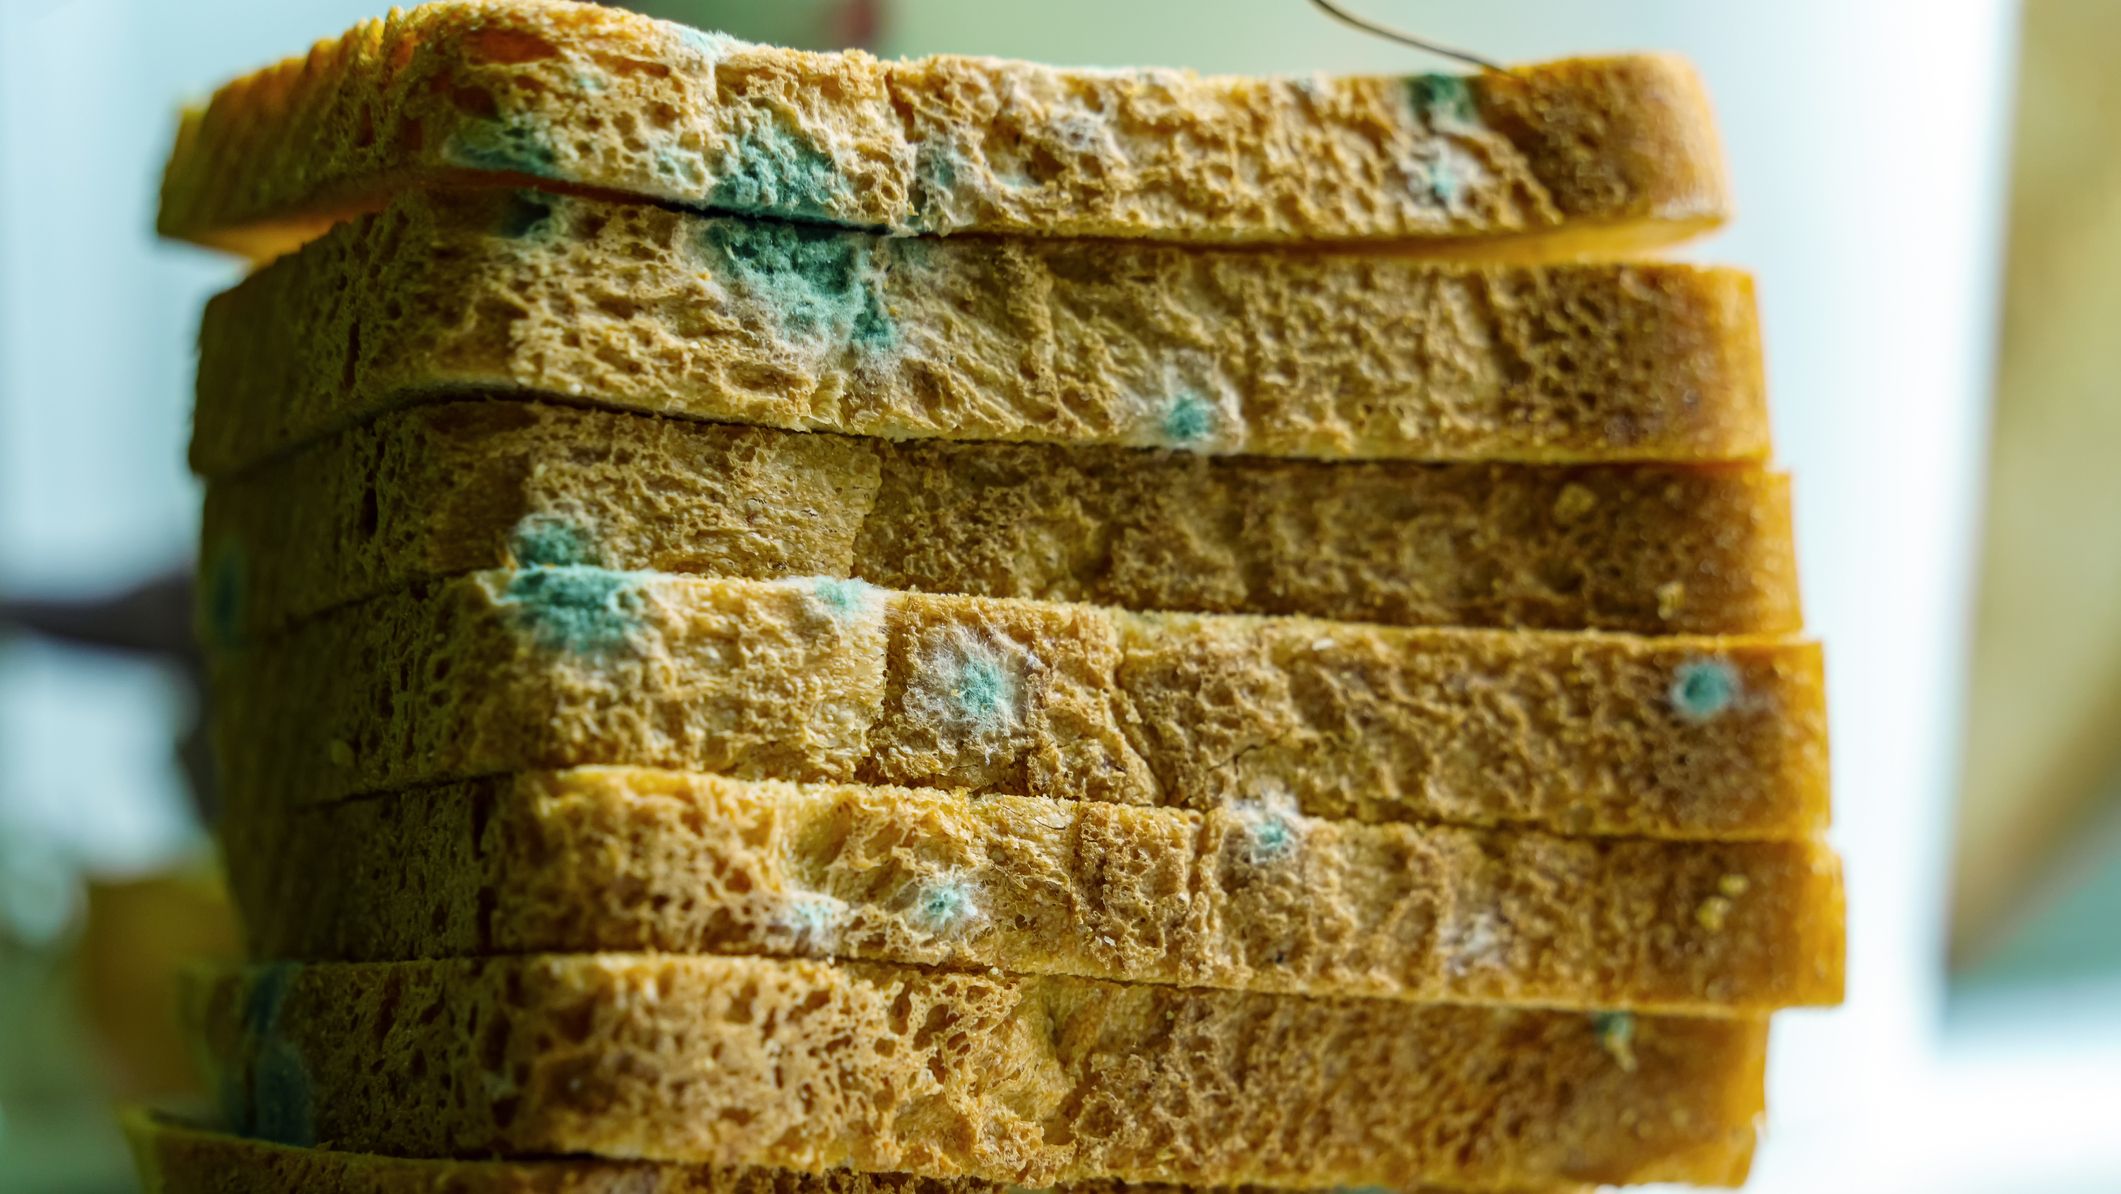 https://hips.hearstapps.com/hmg-prod/images/white-sliced-bread-affected-by-green-mold-royalty-free-image-1656444992.jpg?crop=1xw:0.84415xh;center,top